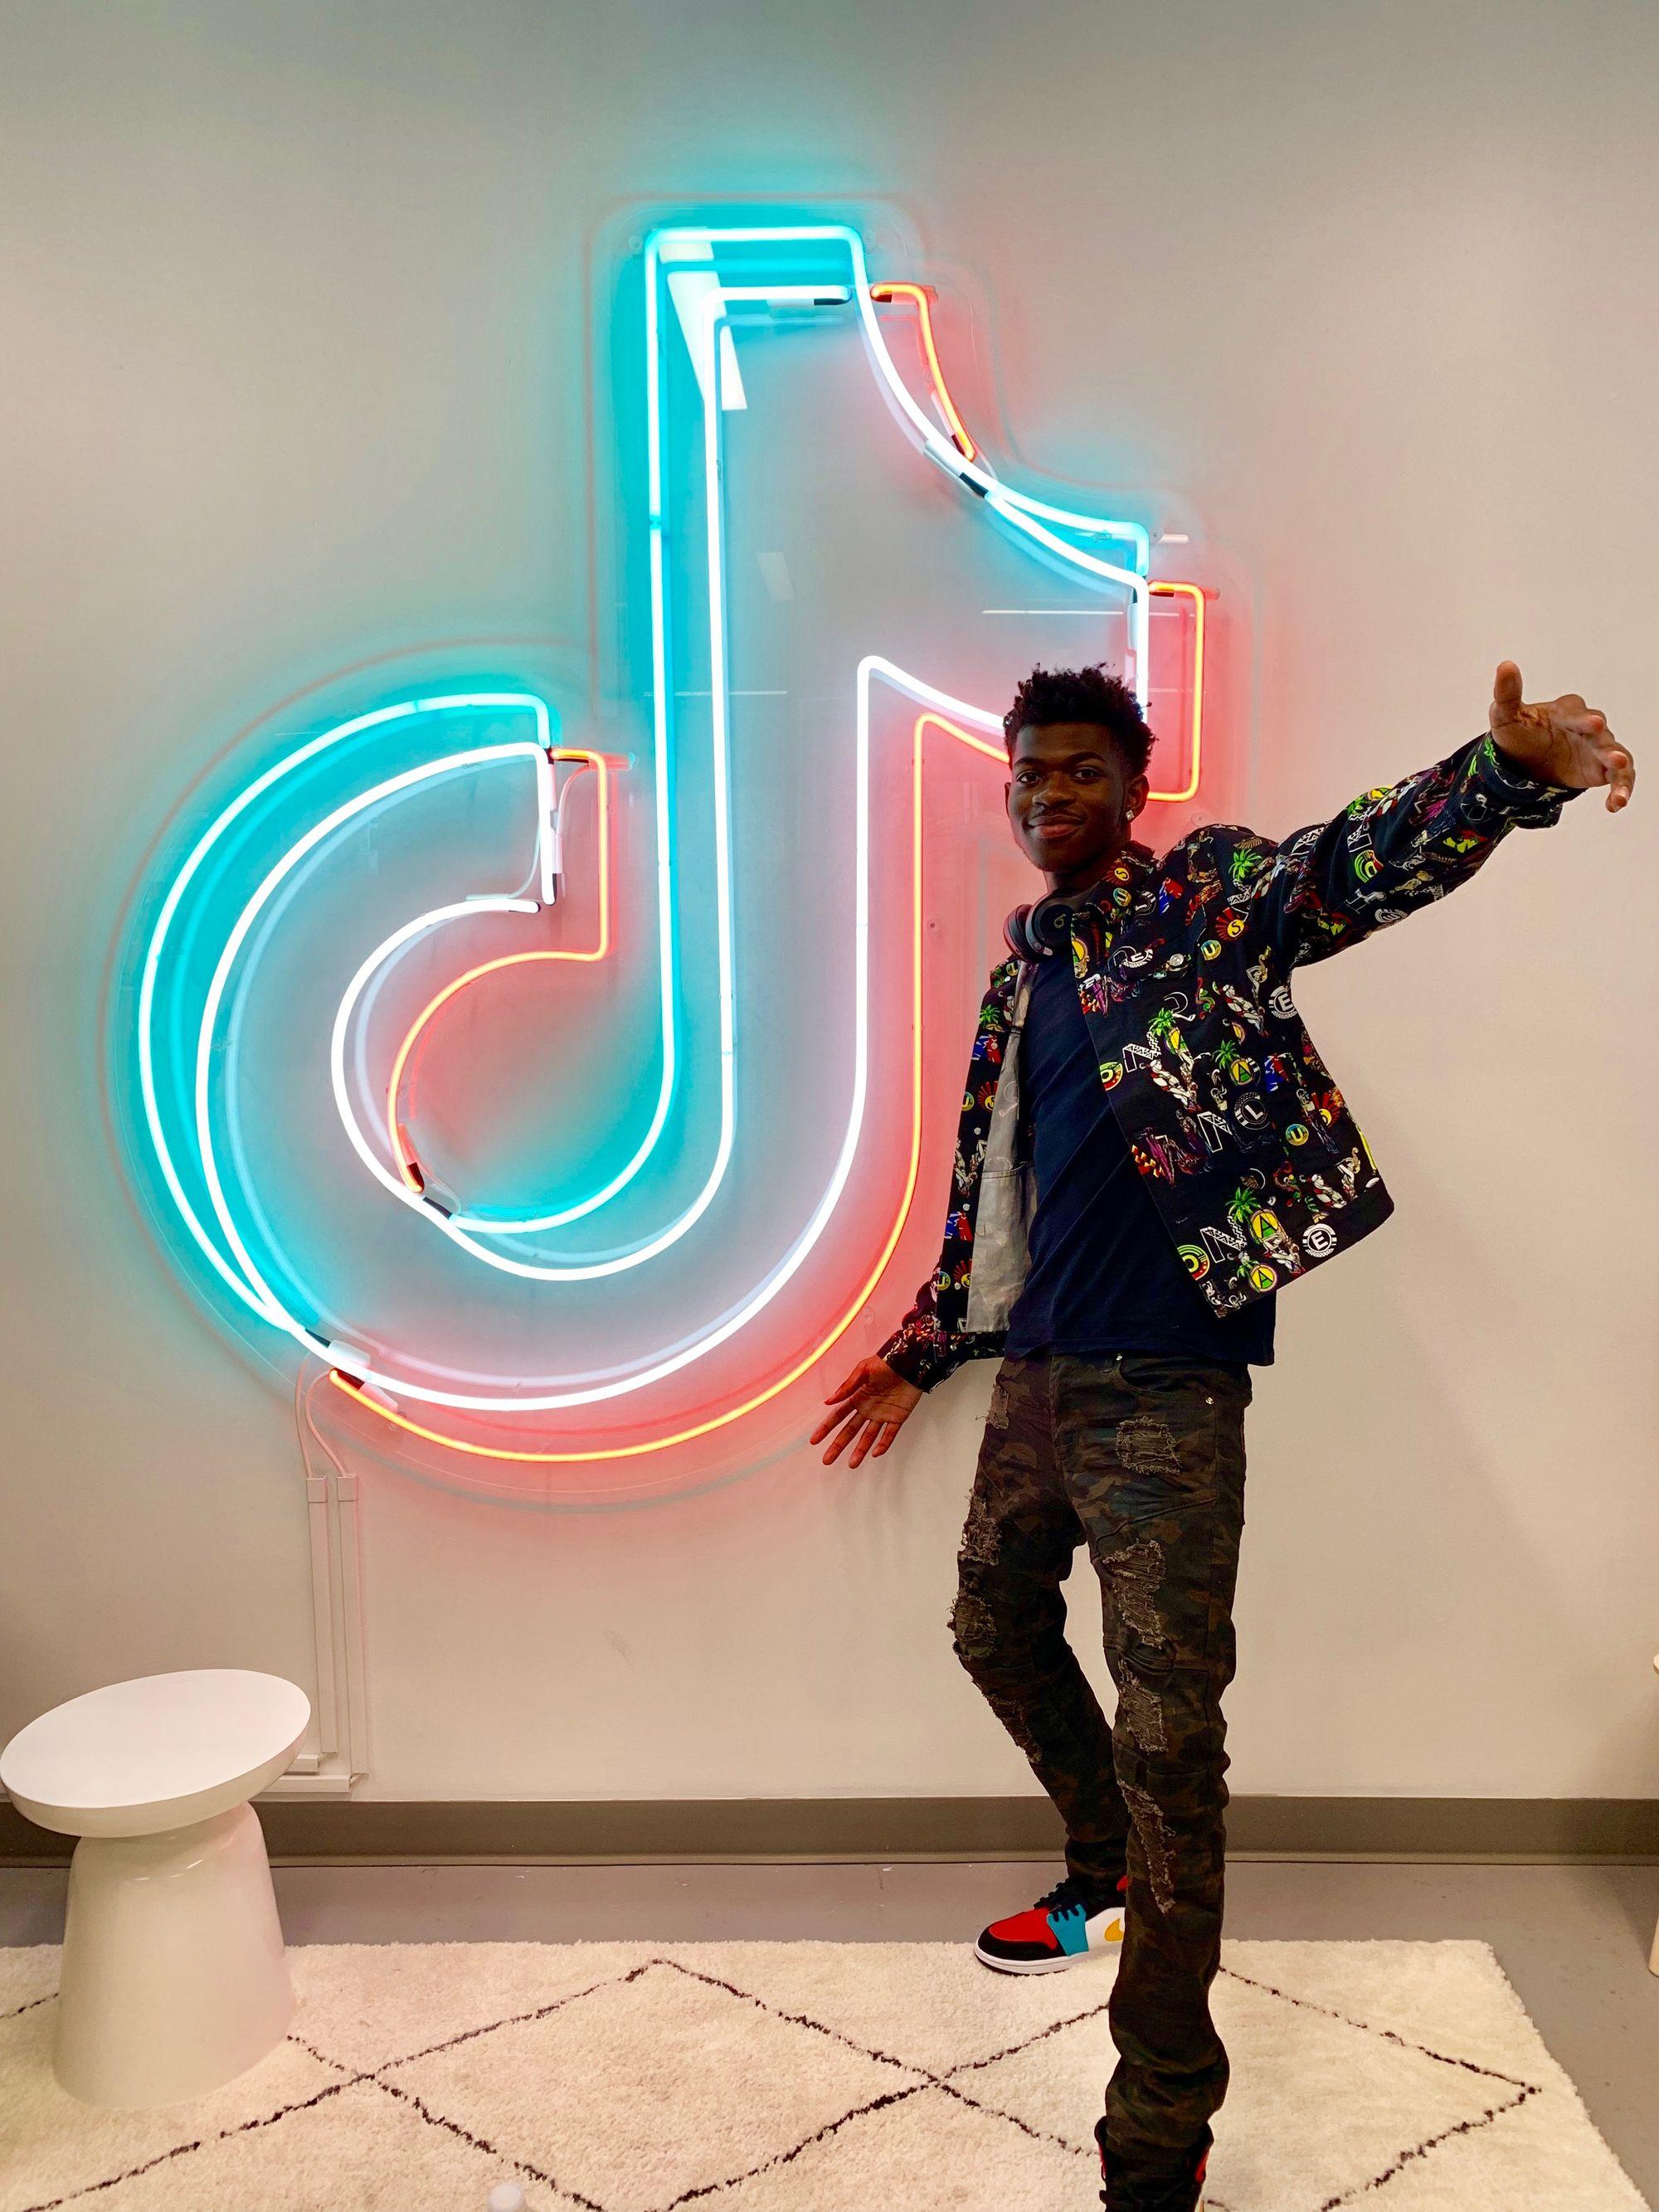 Old Town Road' proves TikTok is a new SoundCloud for artists